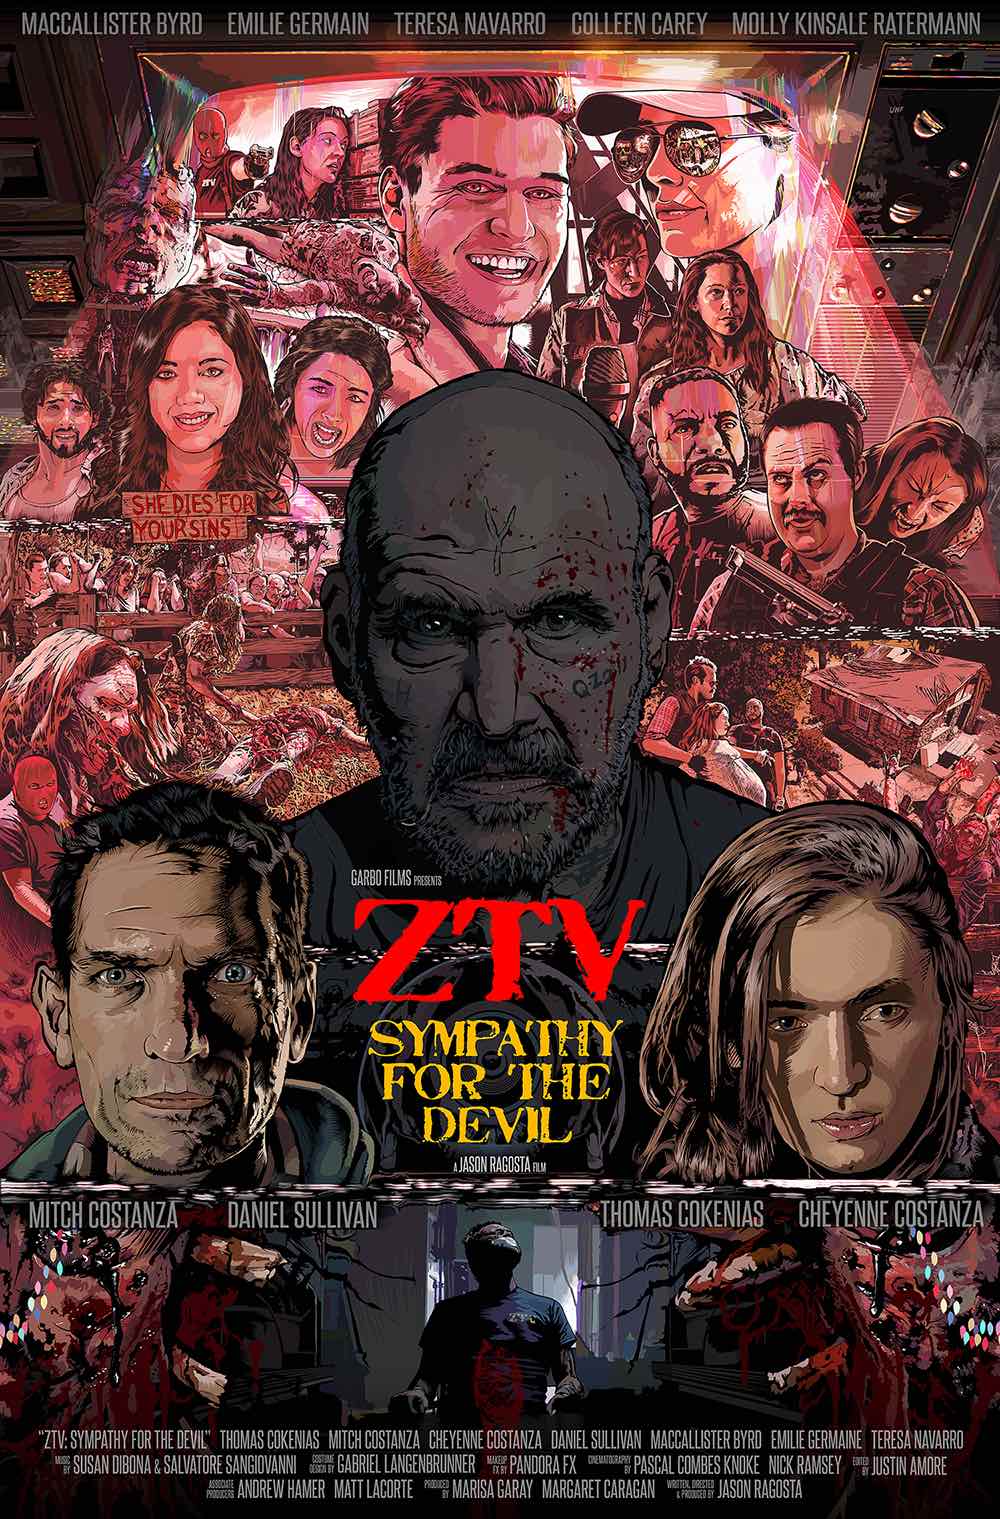 Jason Ragosta is currently crowdfunding his latest short film, 'ZTV: Sympathy for the Devil', a proof-of-concept exploring his post-apocalyptic world.